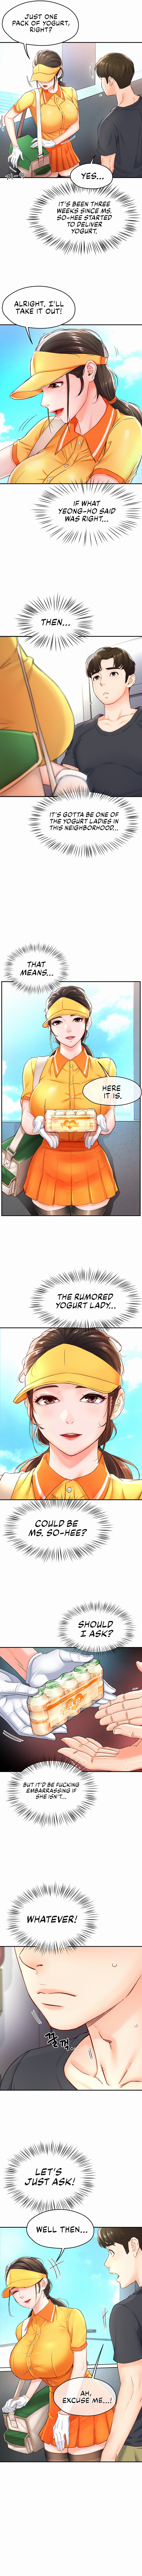 Yogurt Delivery Lady - Chapter 1 Page 6